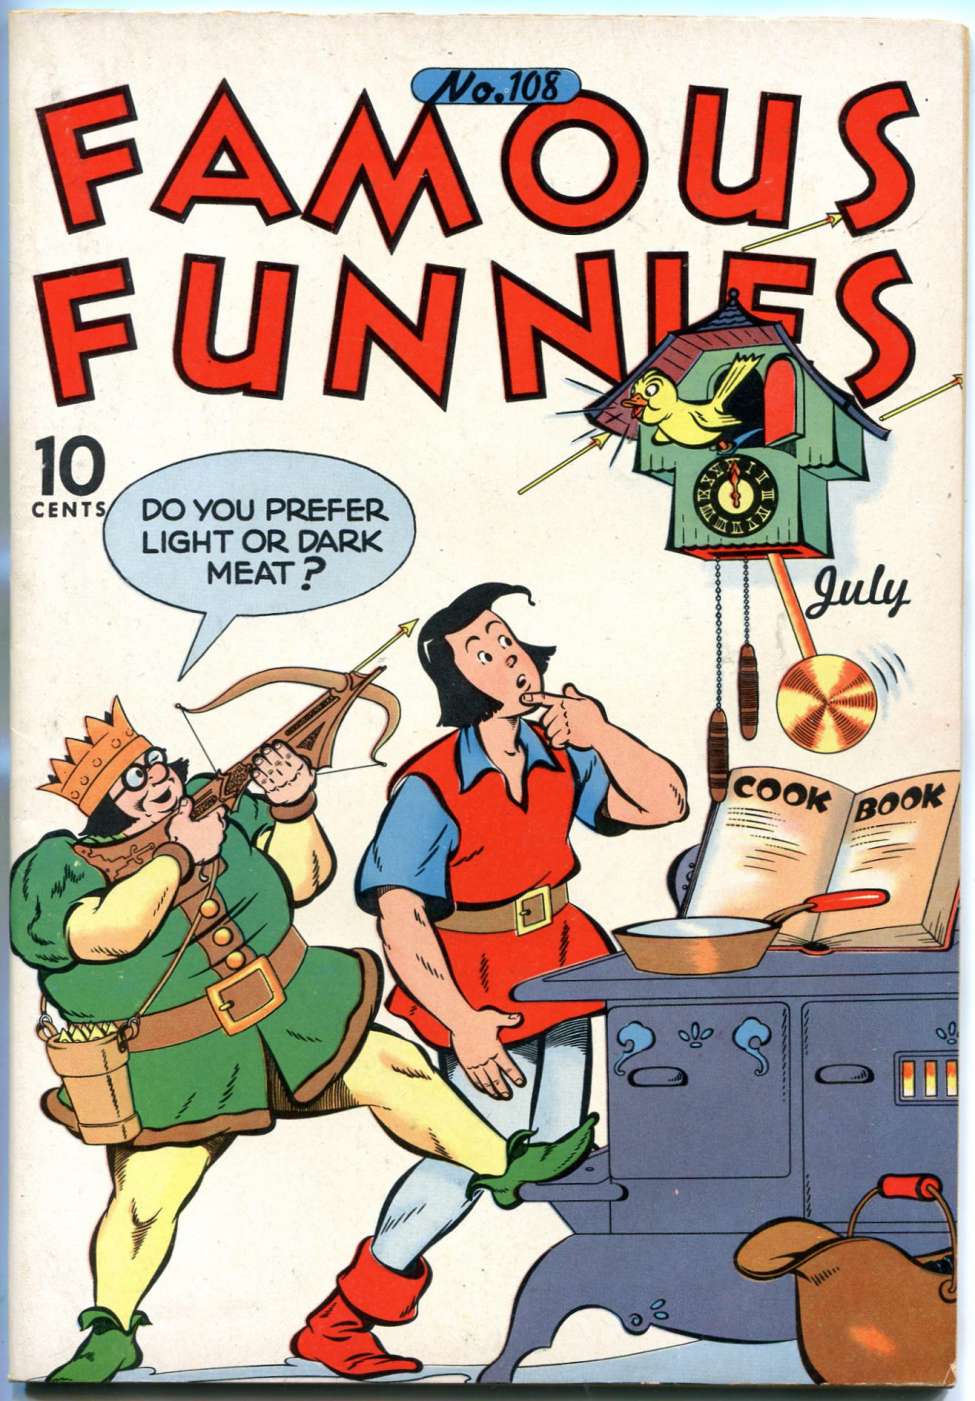 Book Cover For Famous Funnies 108